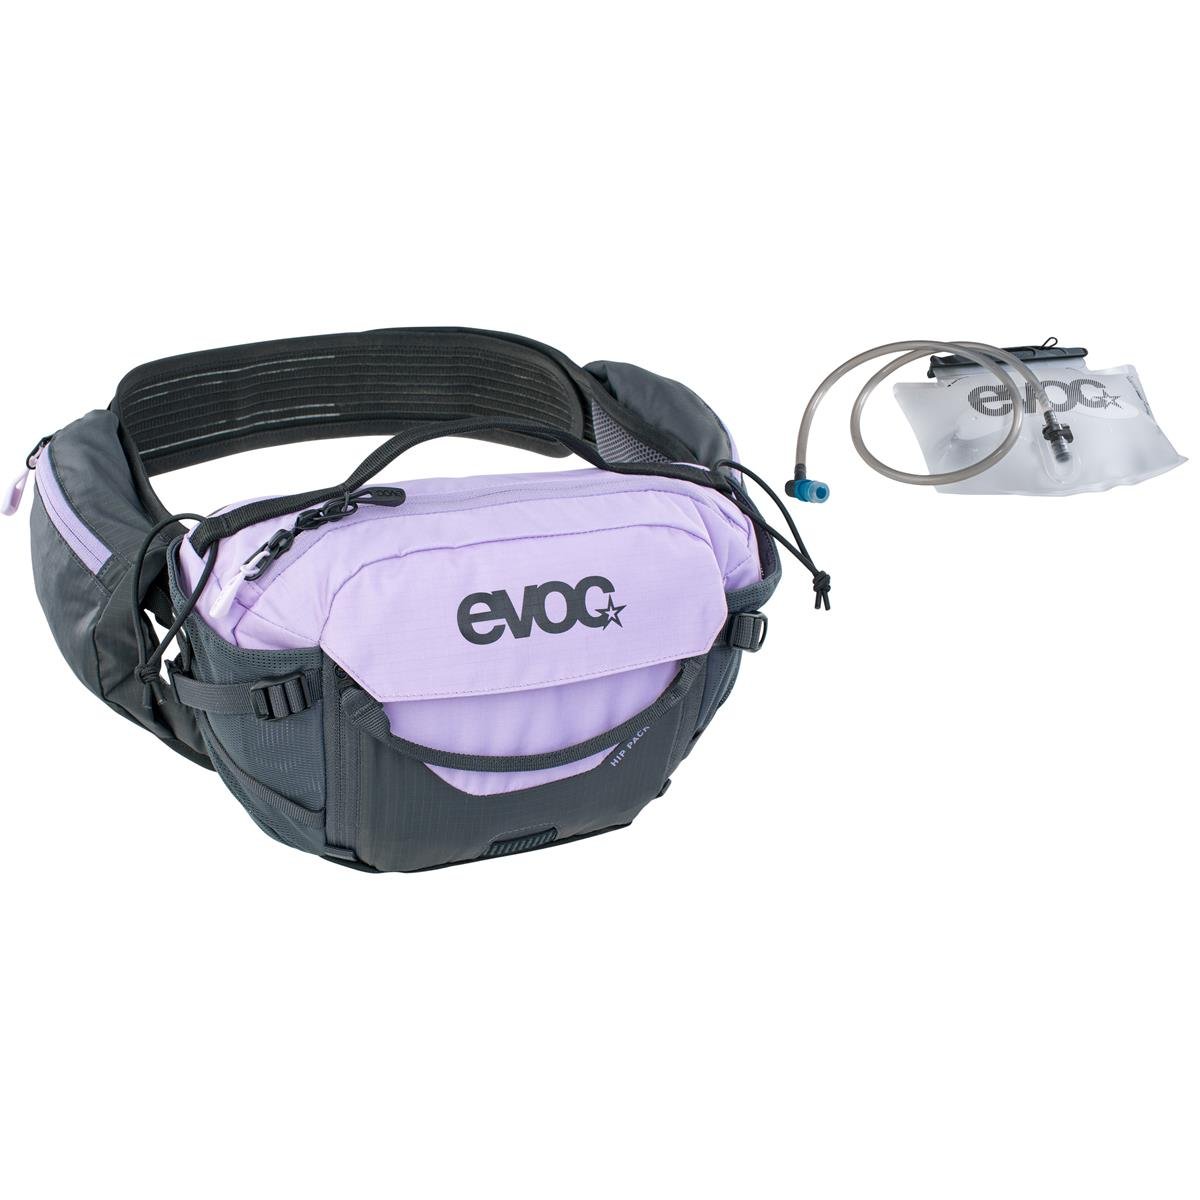 Evoc Hip Pack with Hydration System incl. 1.5L Bladder Pro 3 L Multicolor